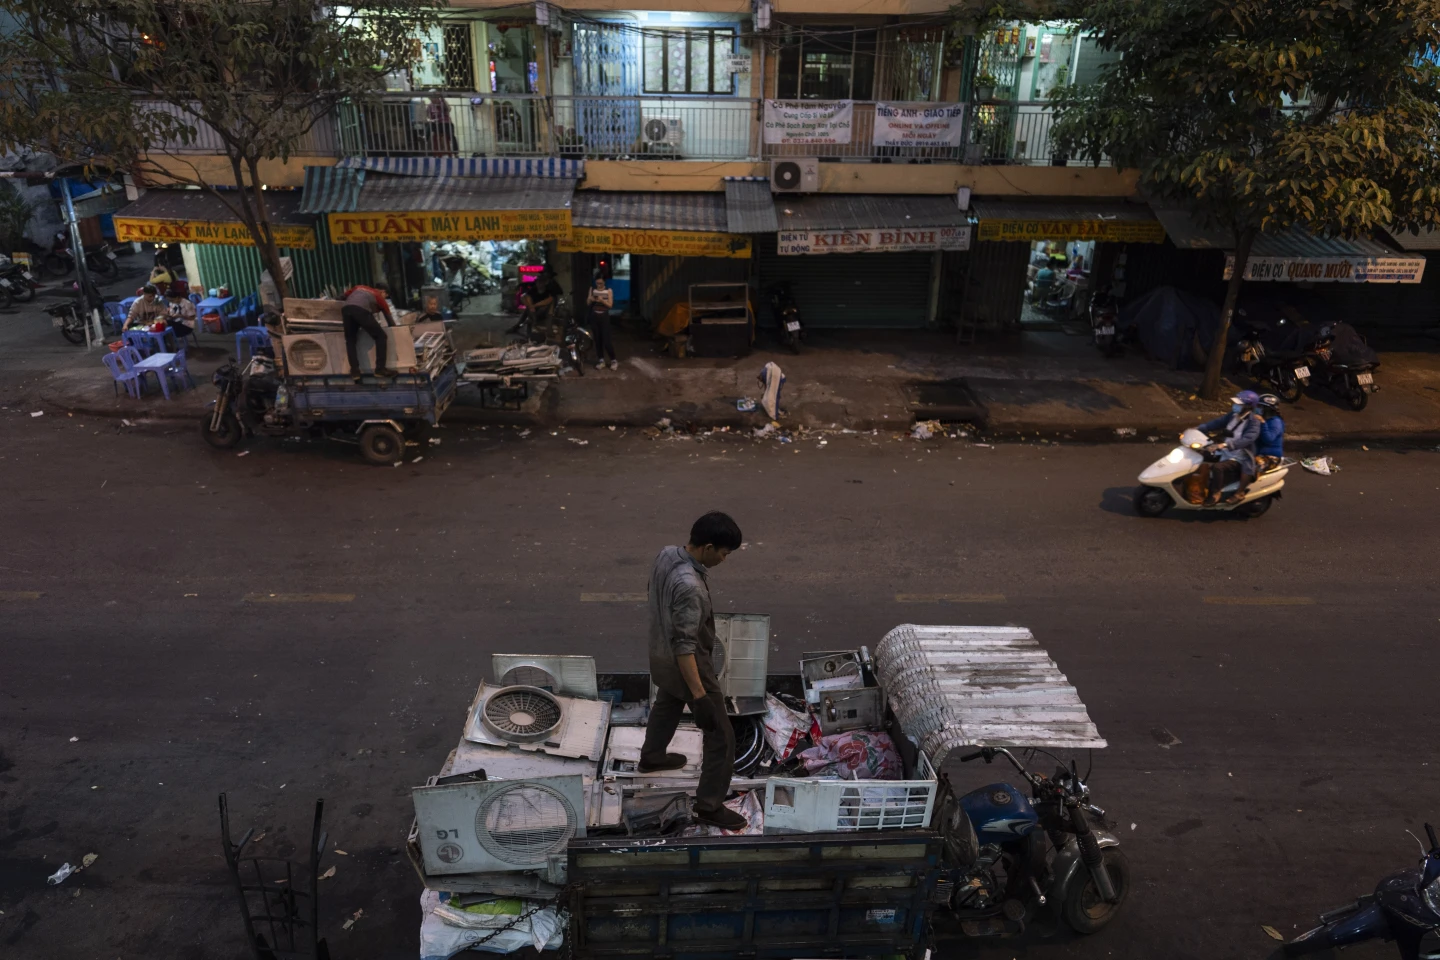 Waste workers load casings of various home appliances onto their trucks in Nhat Tao market, the largest informal recycling market in Ho Chi Minh City, Vietnam, Monday, 29 January 2024. Less than a quarter of electronic waste was properly collected and recycled in 2022. Photo: Jae C. Hong / AP Photo